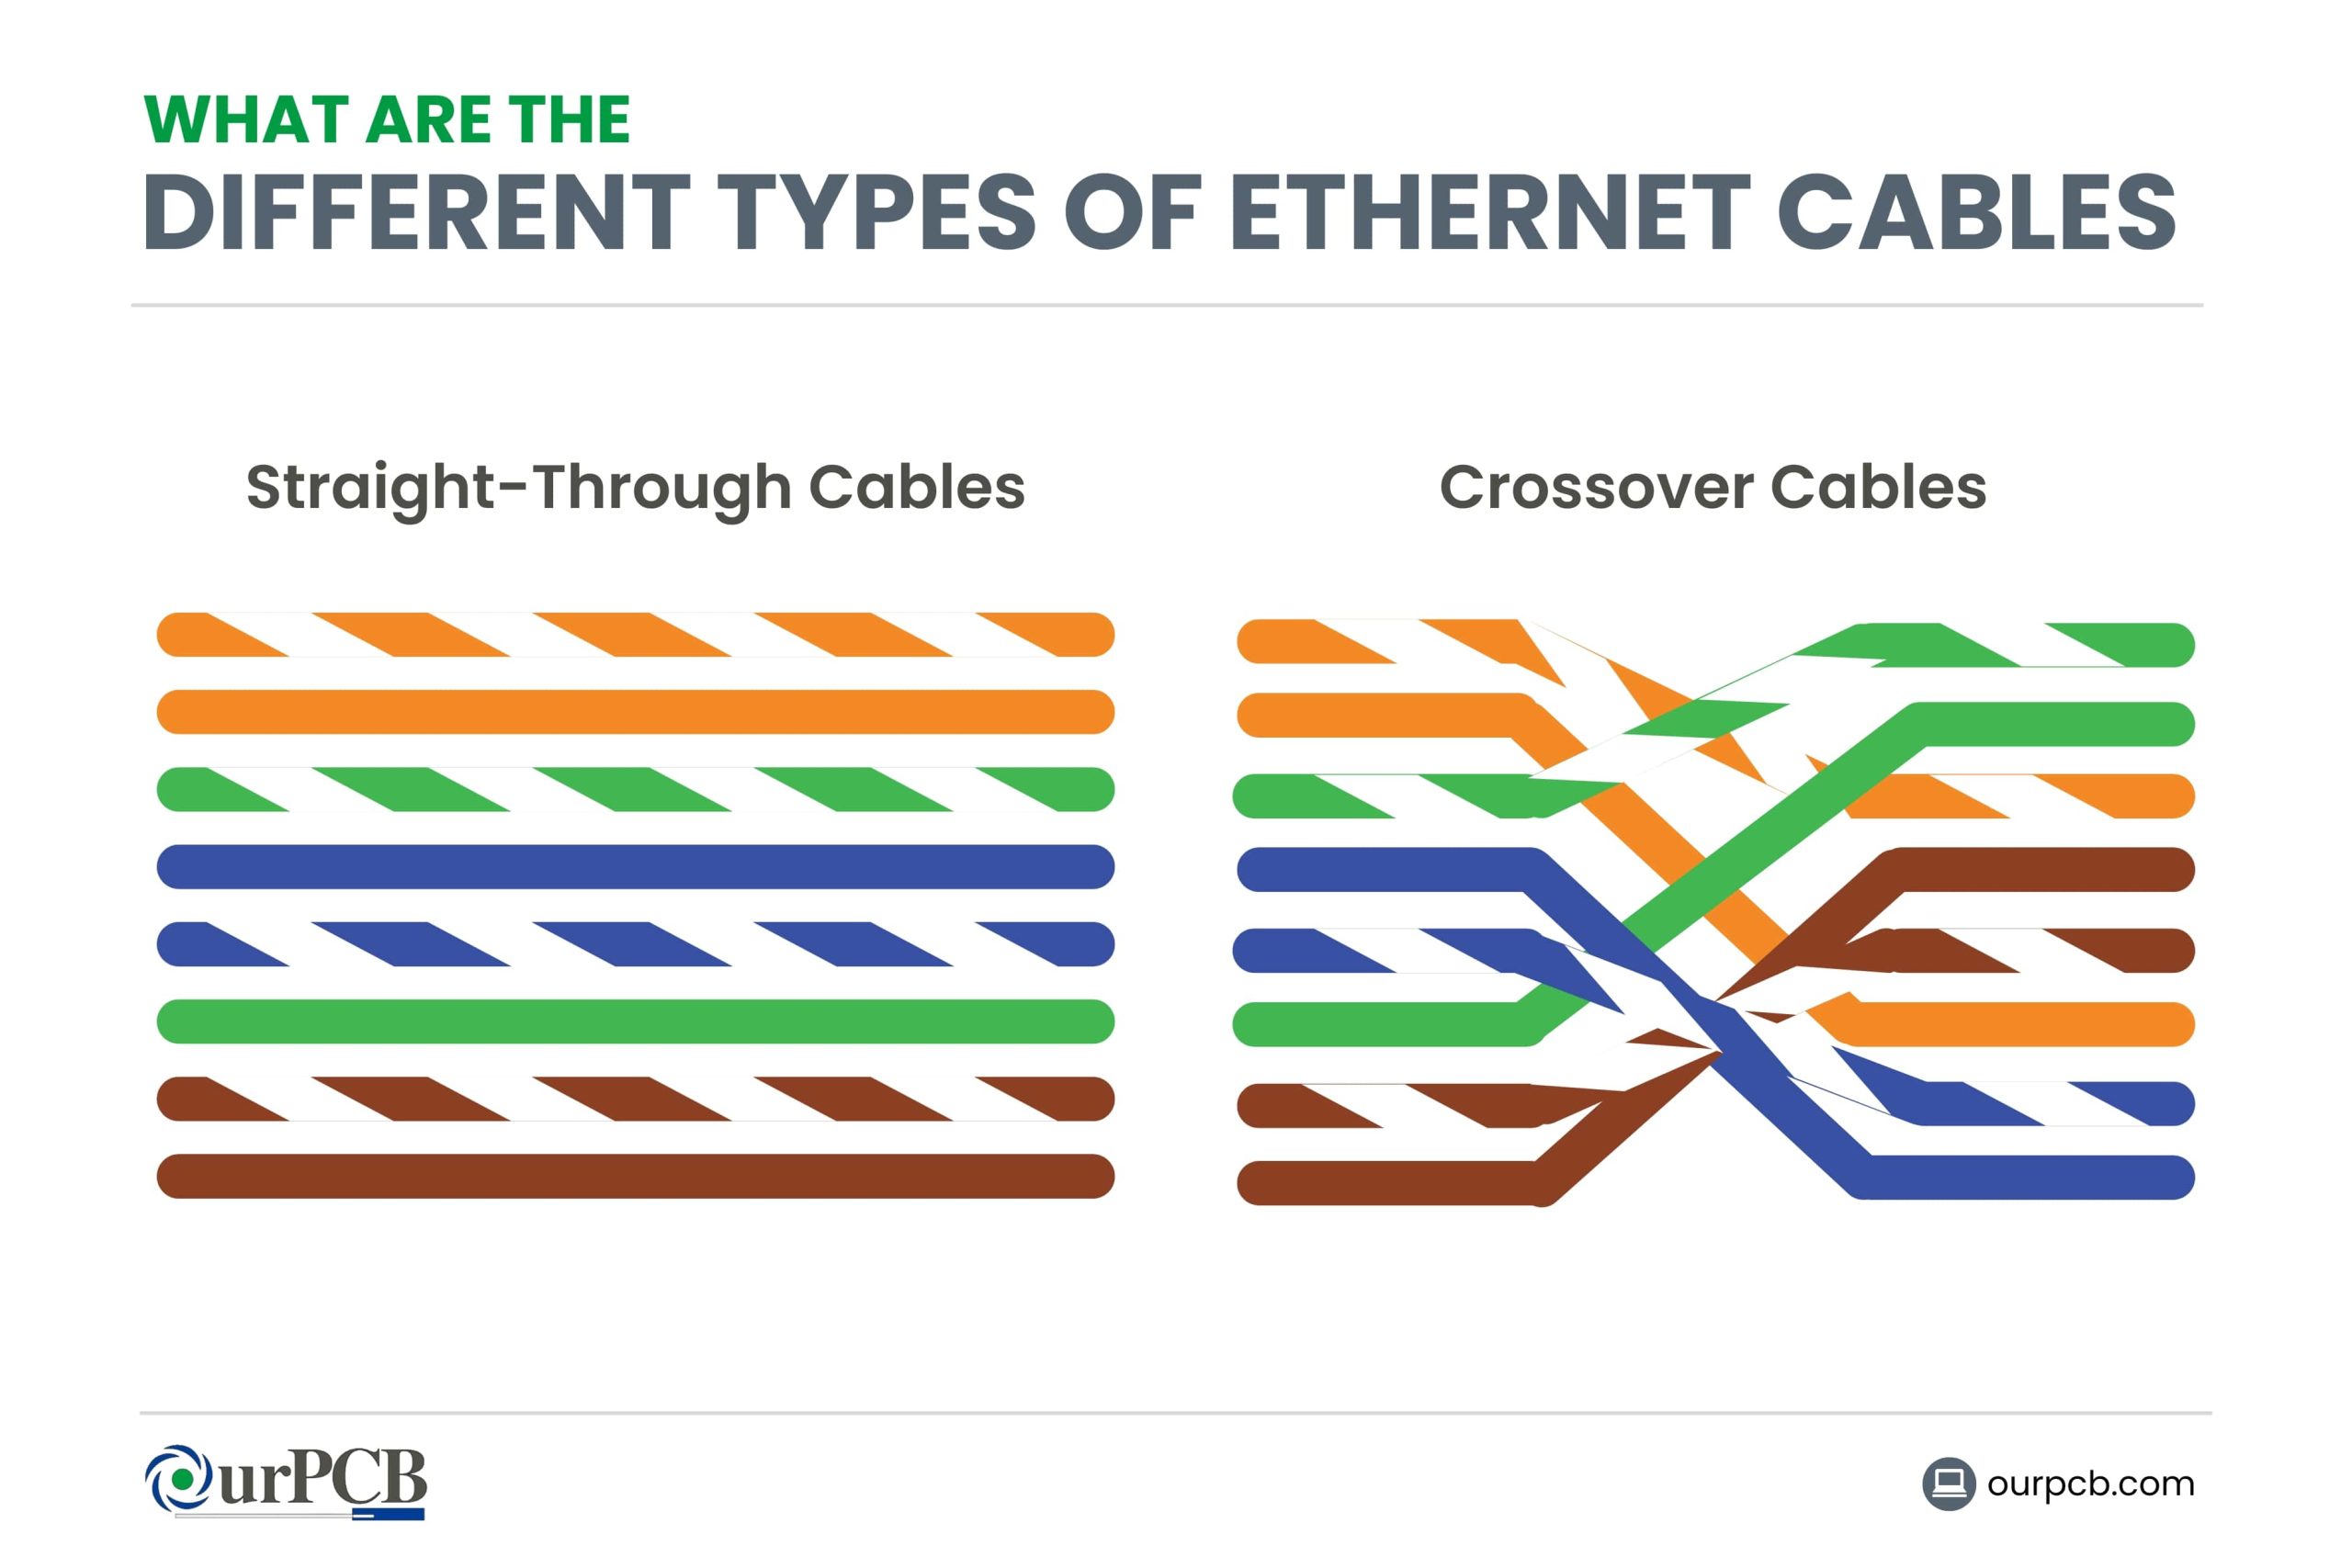 What Are the Different Types of Ethernet Cables